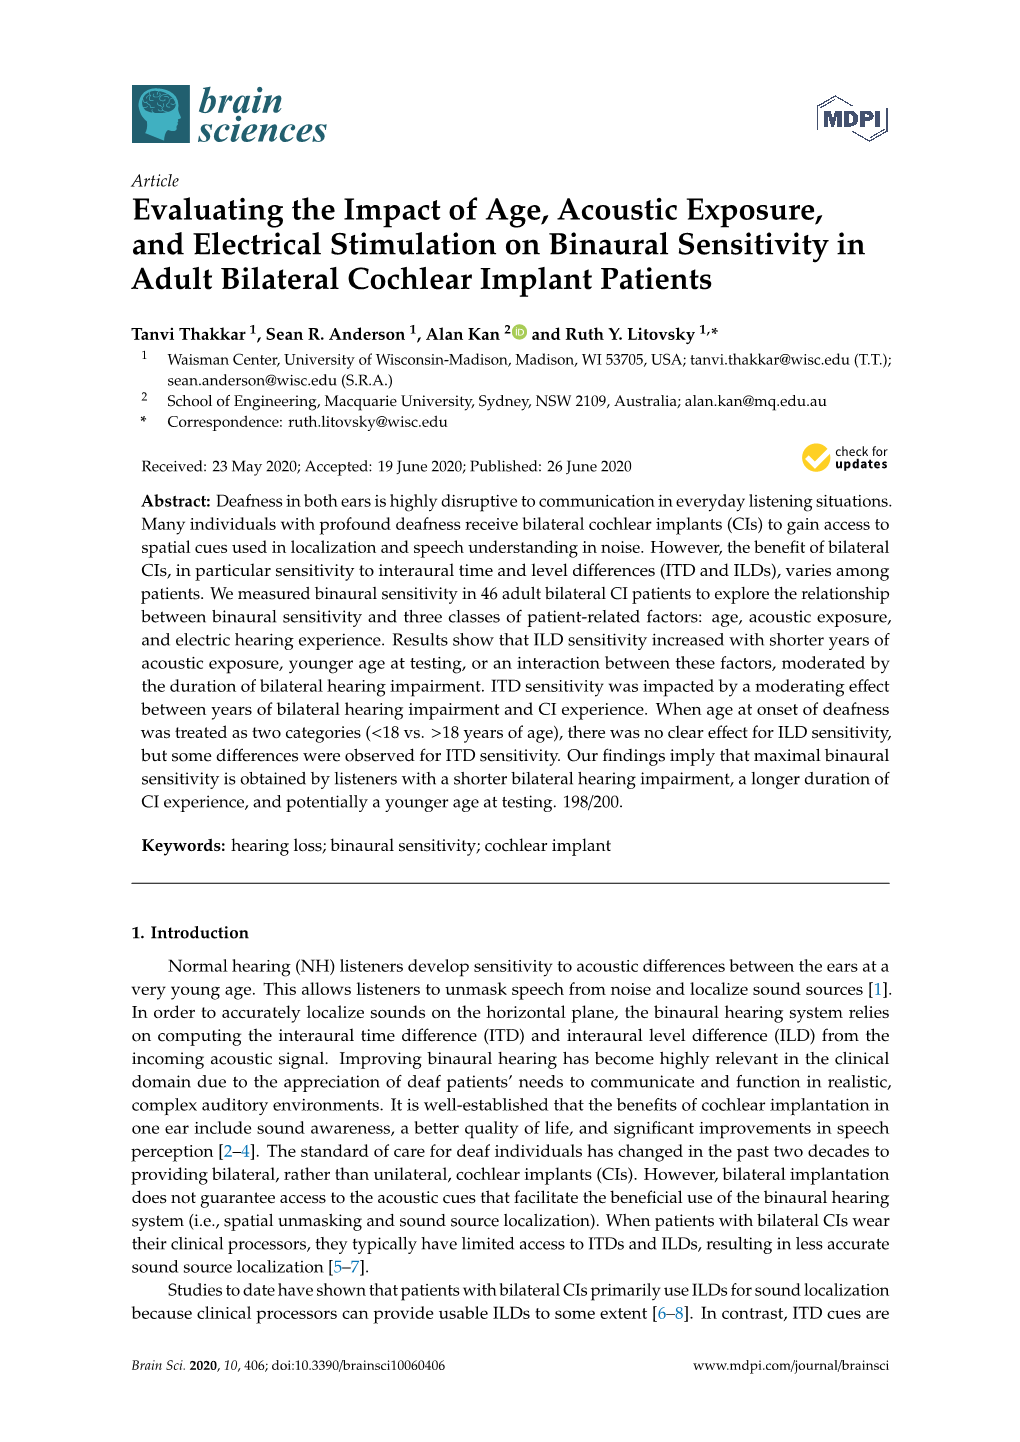 Evaluating the Impact of Age, Acoustic Exposure, and Electrical Stimulation on Binaural Sensitivity in Adult Bilateral Cochlear Implant Patients